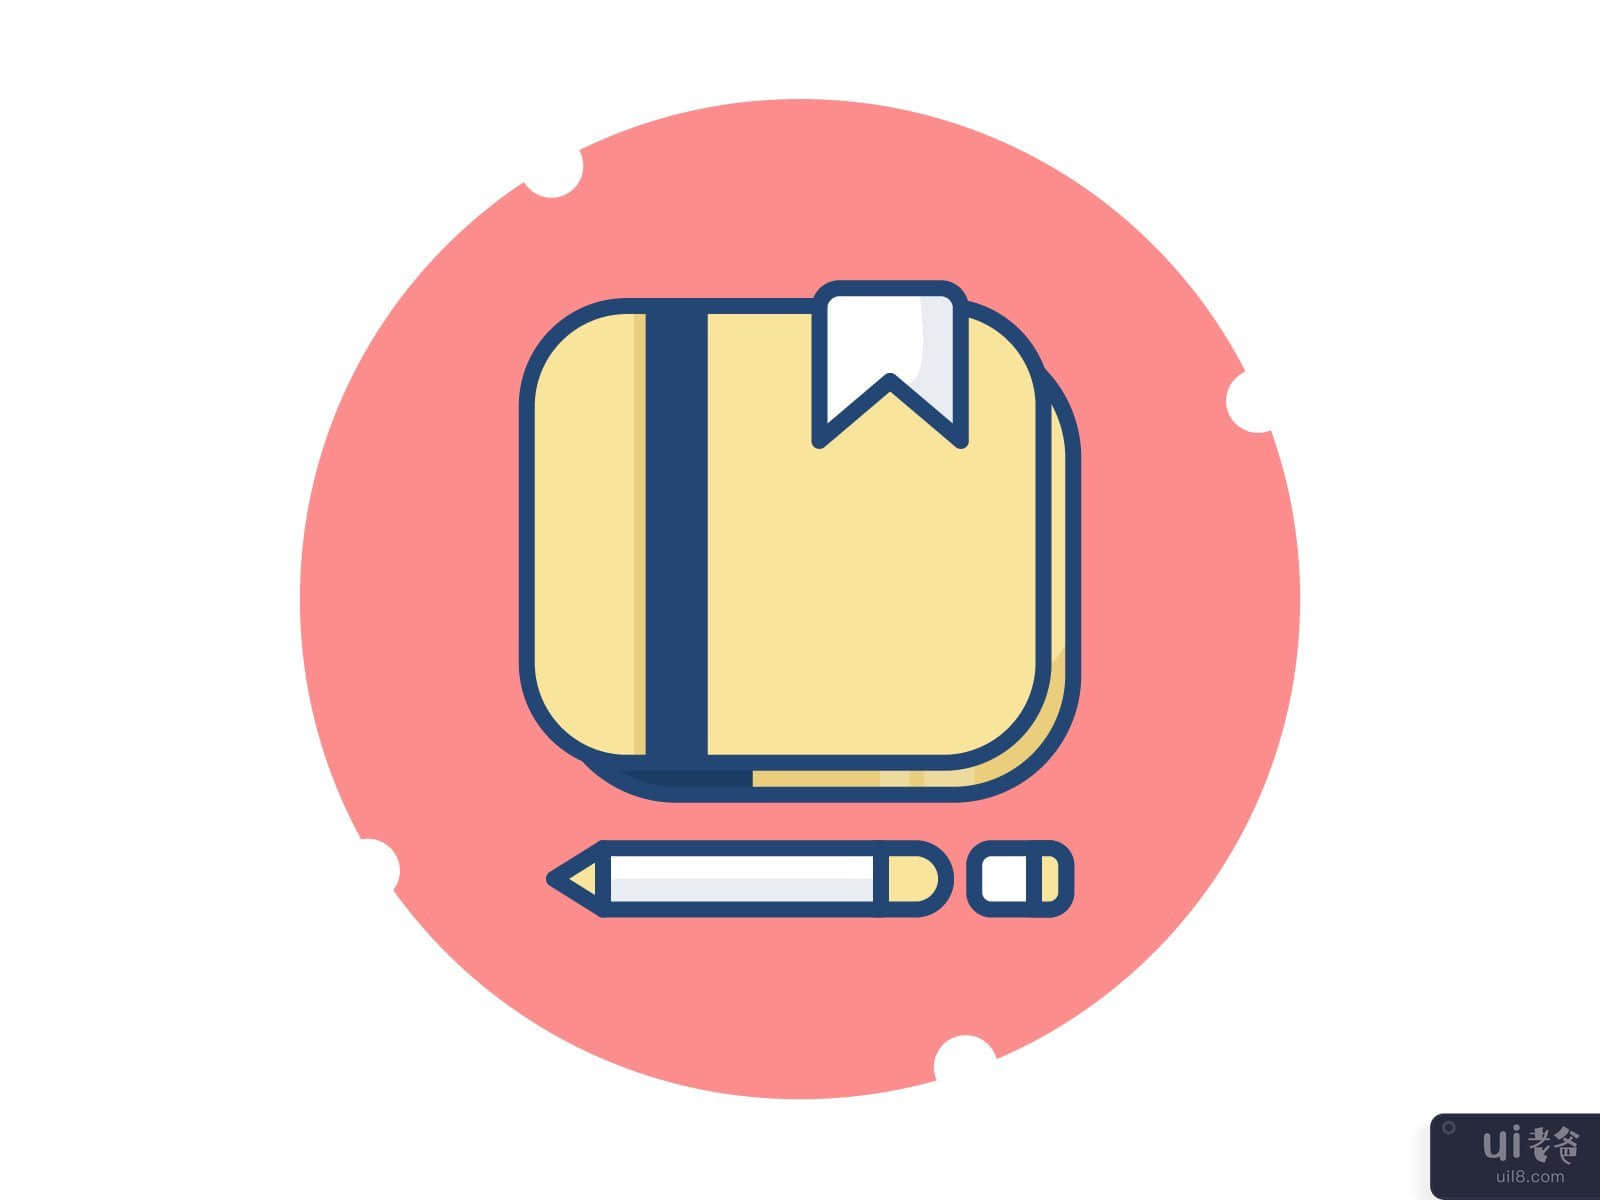 Small Notes icon